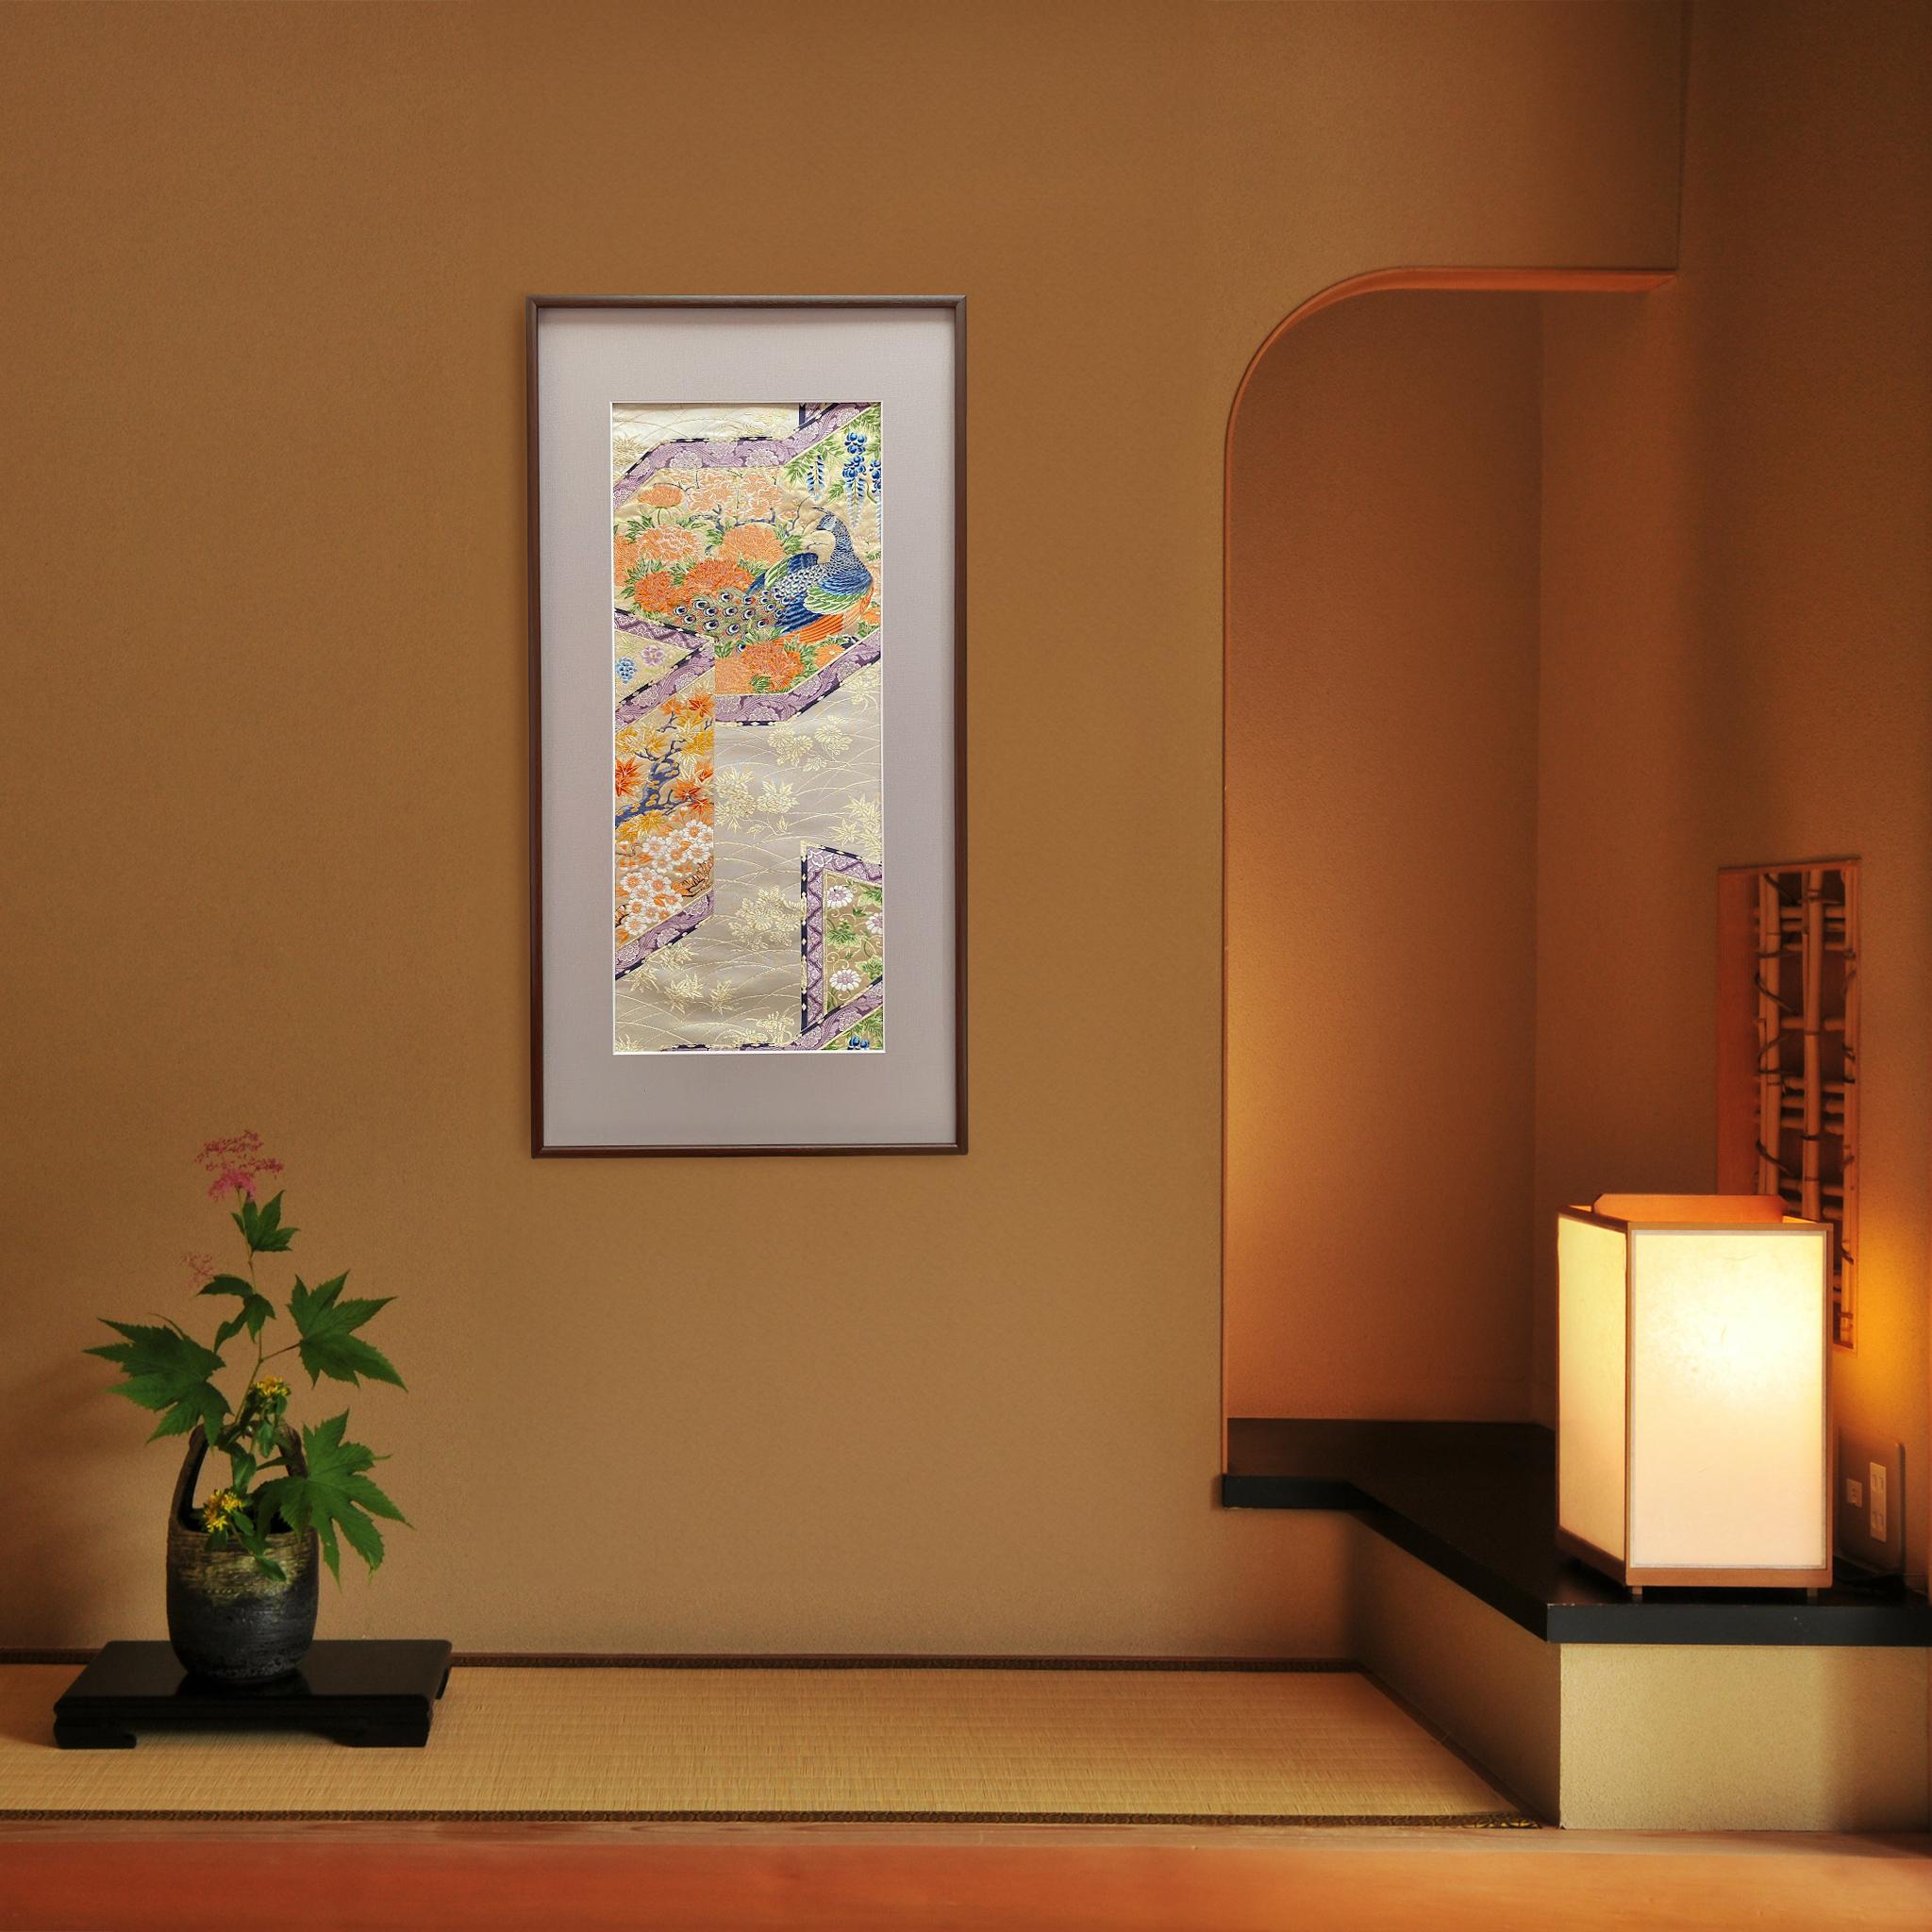 Japanese Kimono Art by Kimono-Couture
Title:The King of Peacock

We would like to present to you this exquisite Kimono Wall Art, meticulously embroidered by skilled Japanese craftsmen, which stands as the sole of its kind in the entire world.

We